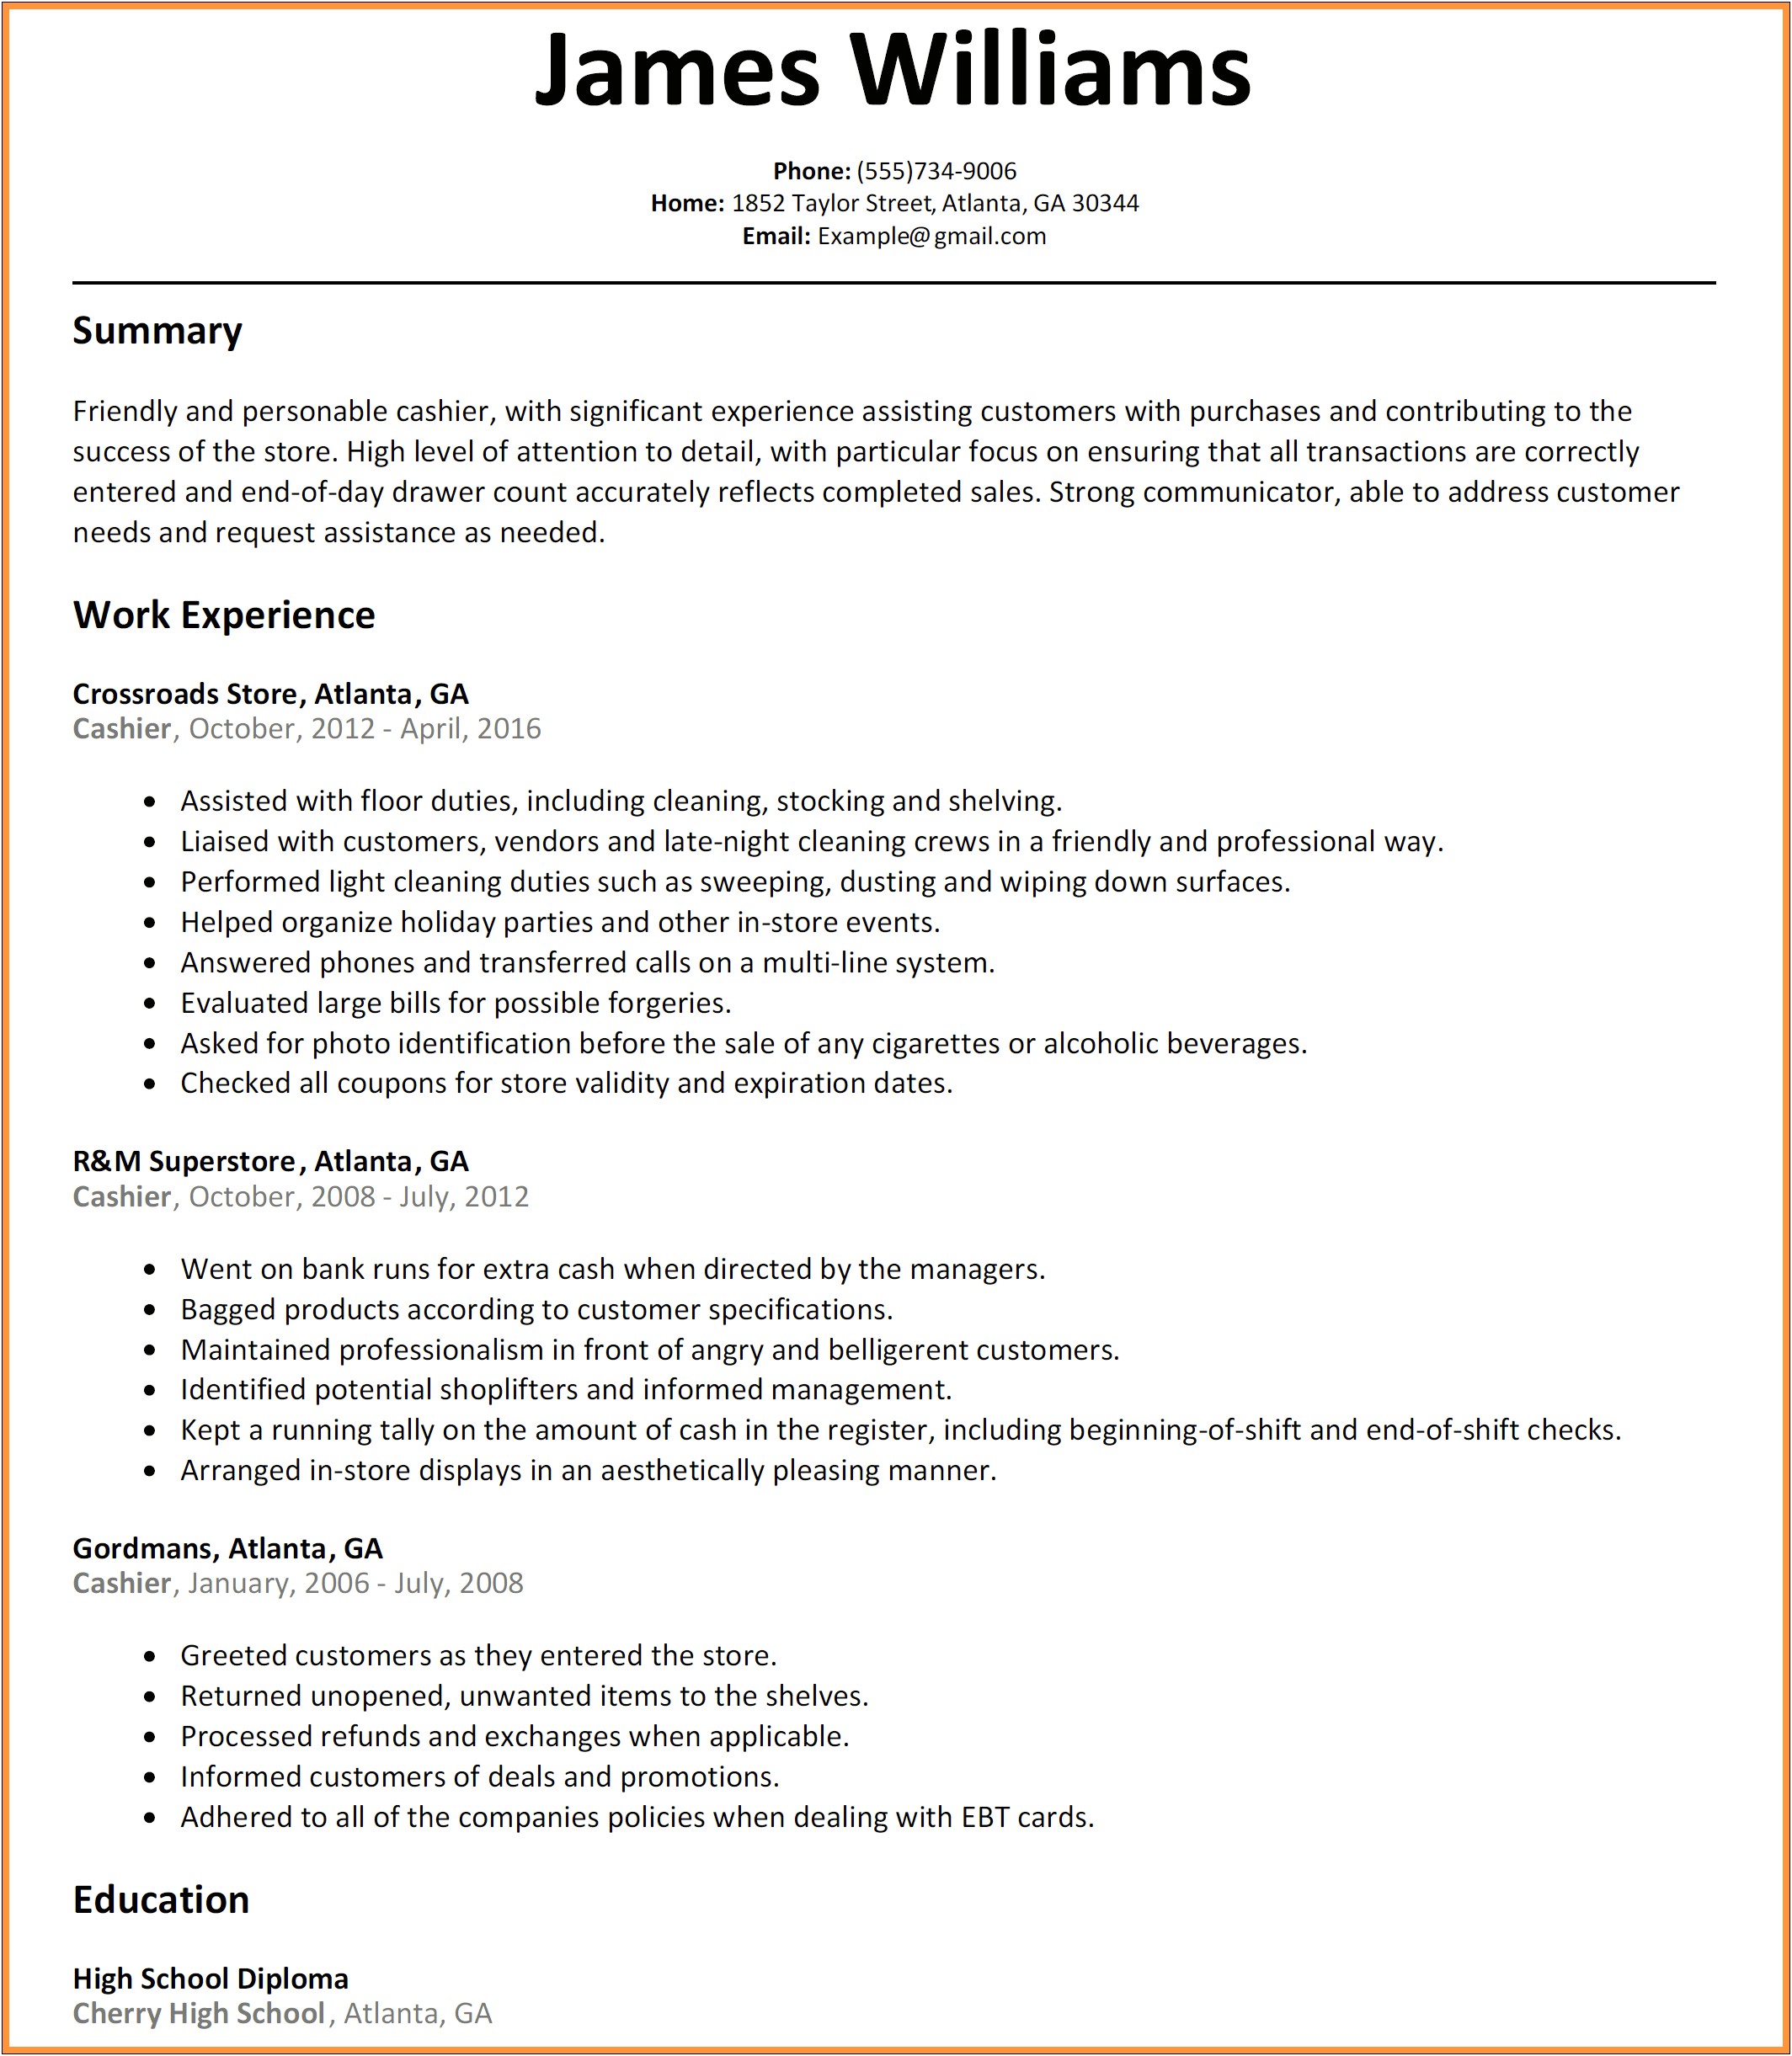 Resume Examples With Cashier Experience